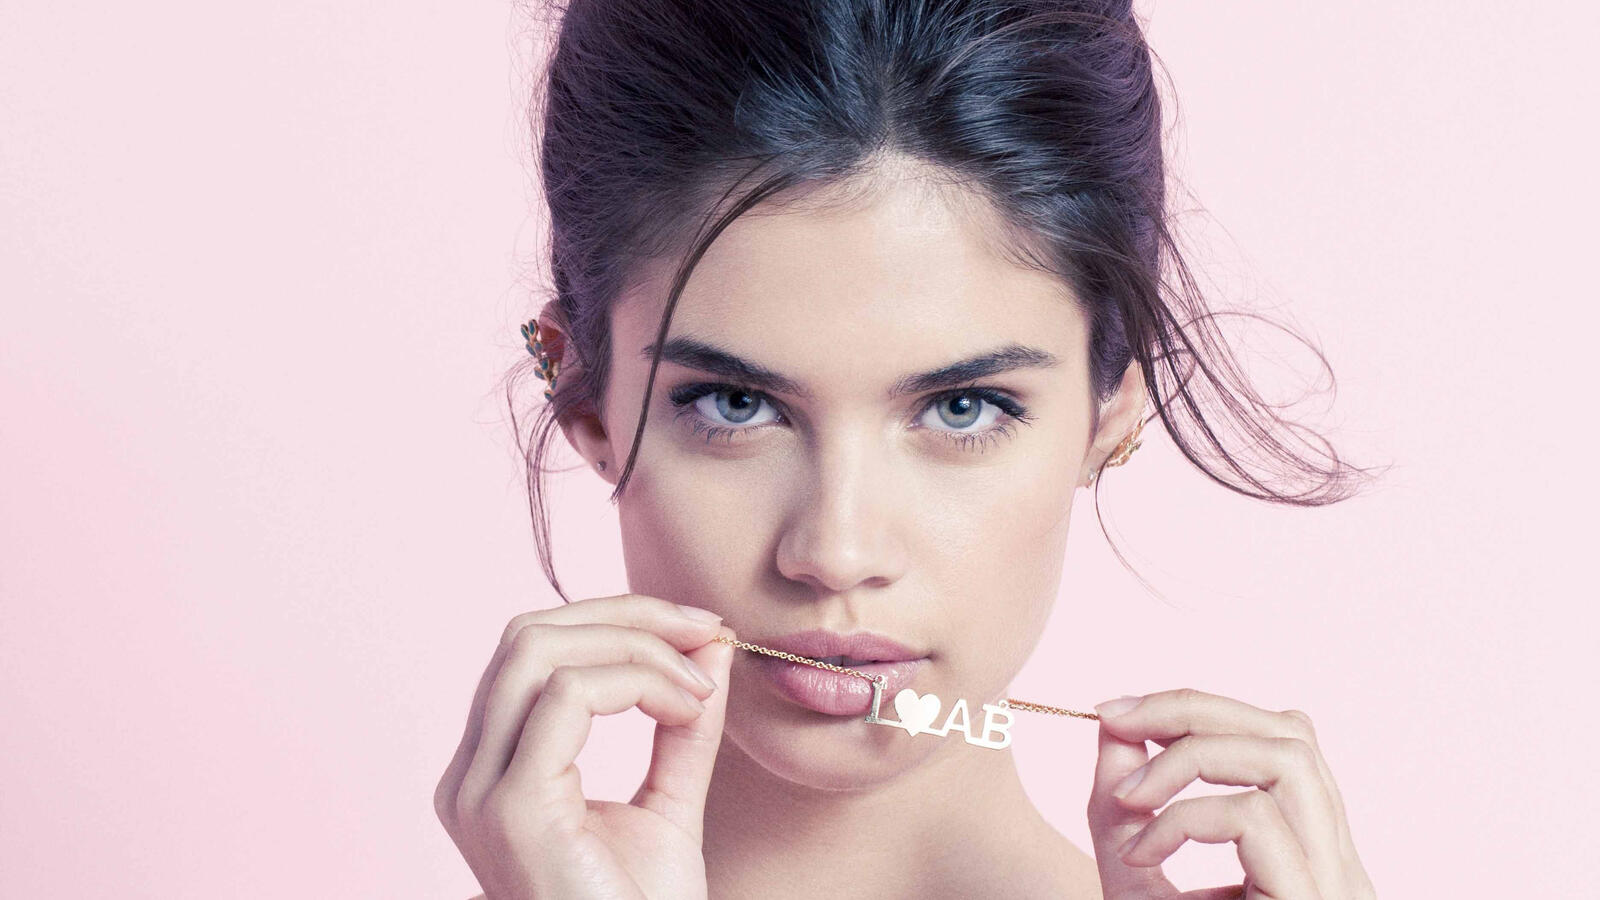 Wallpapers young brunette Sara Sampaio on the desktop